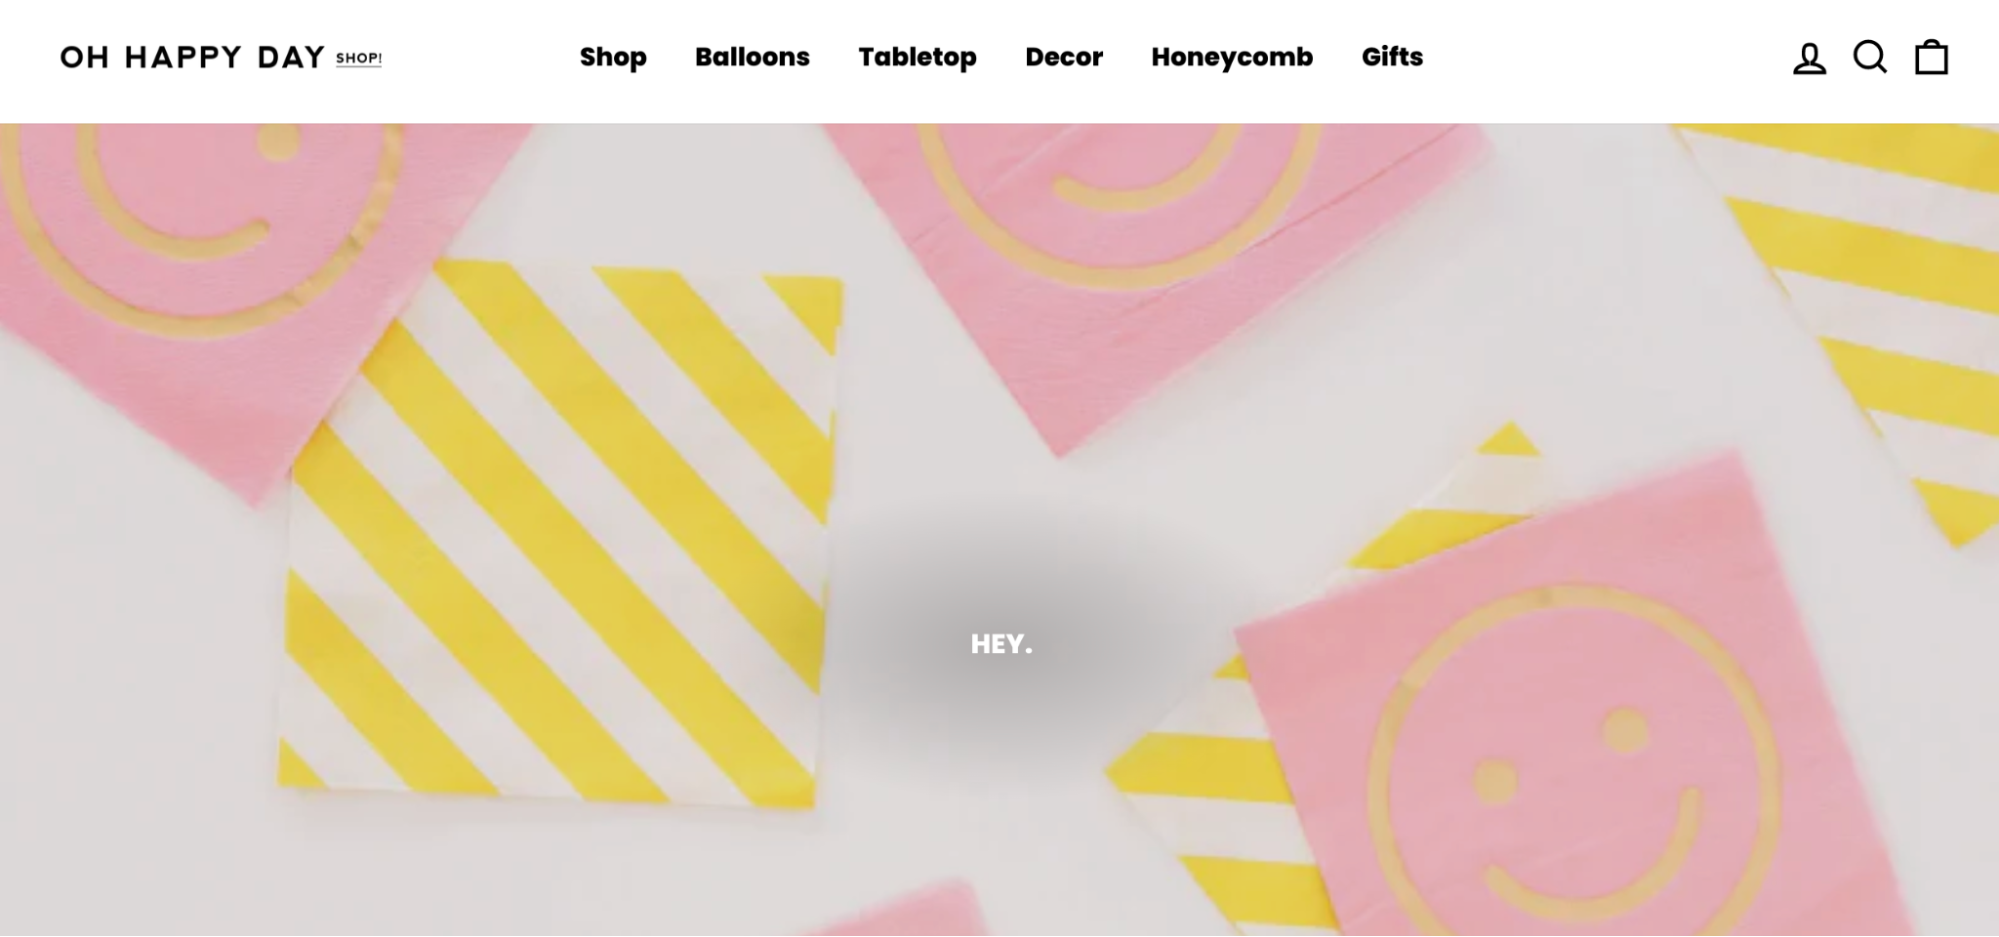 The homepage of Oh Happy Day, which sells party items online.